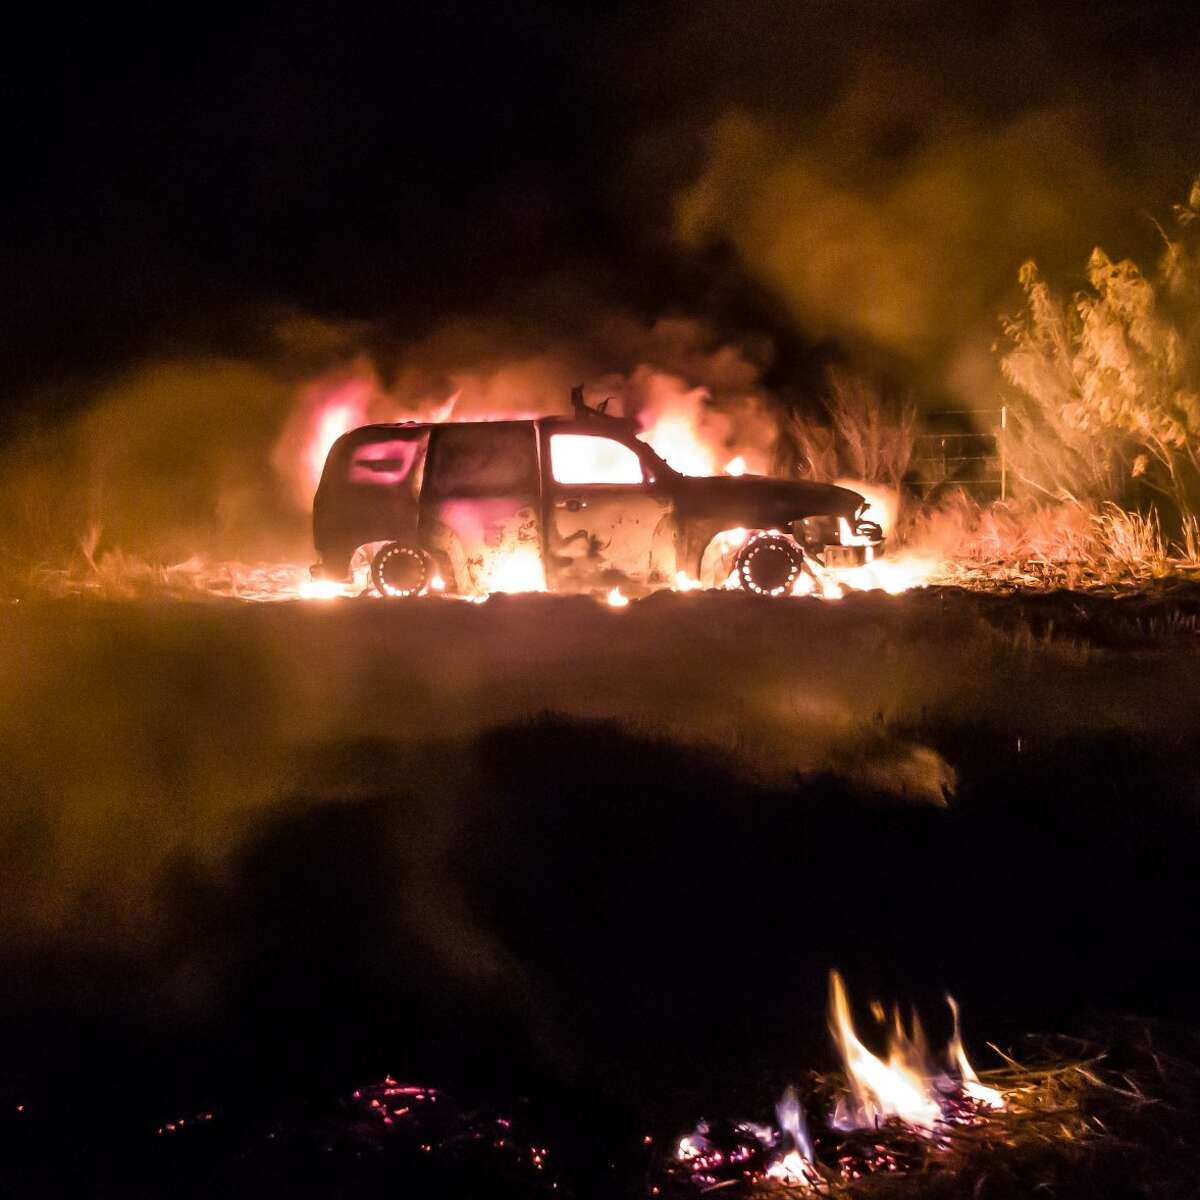 U.S. Border Patrol agents said they stopped a human smuggling attempt and rescued people from this vehicle on fire.